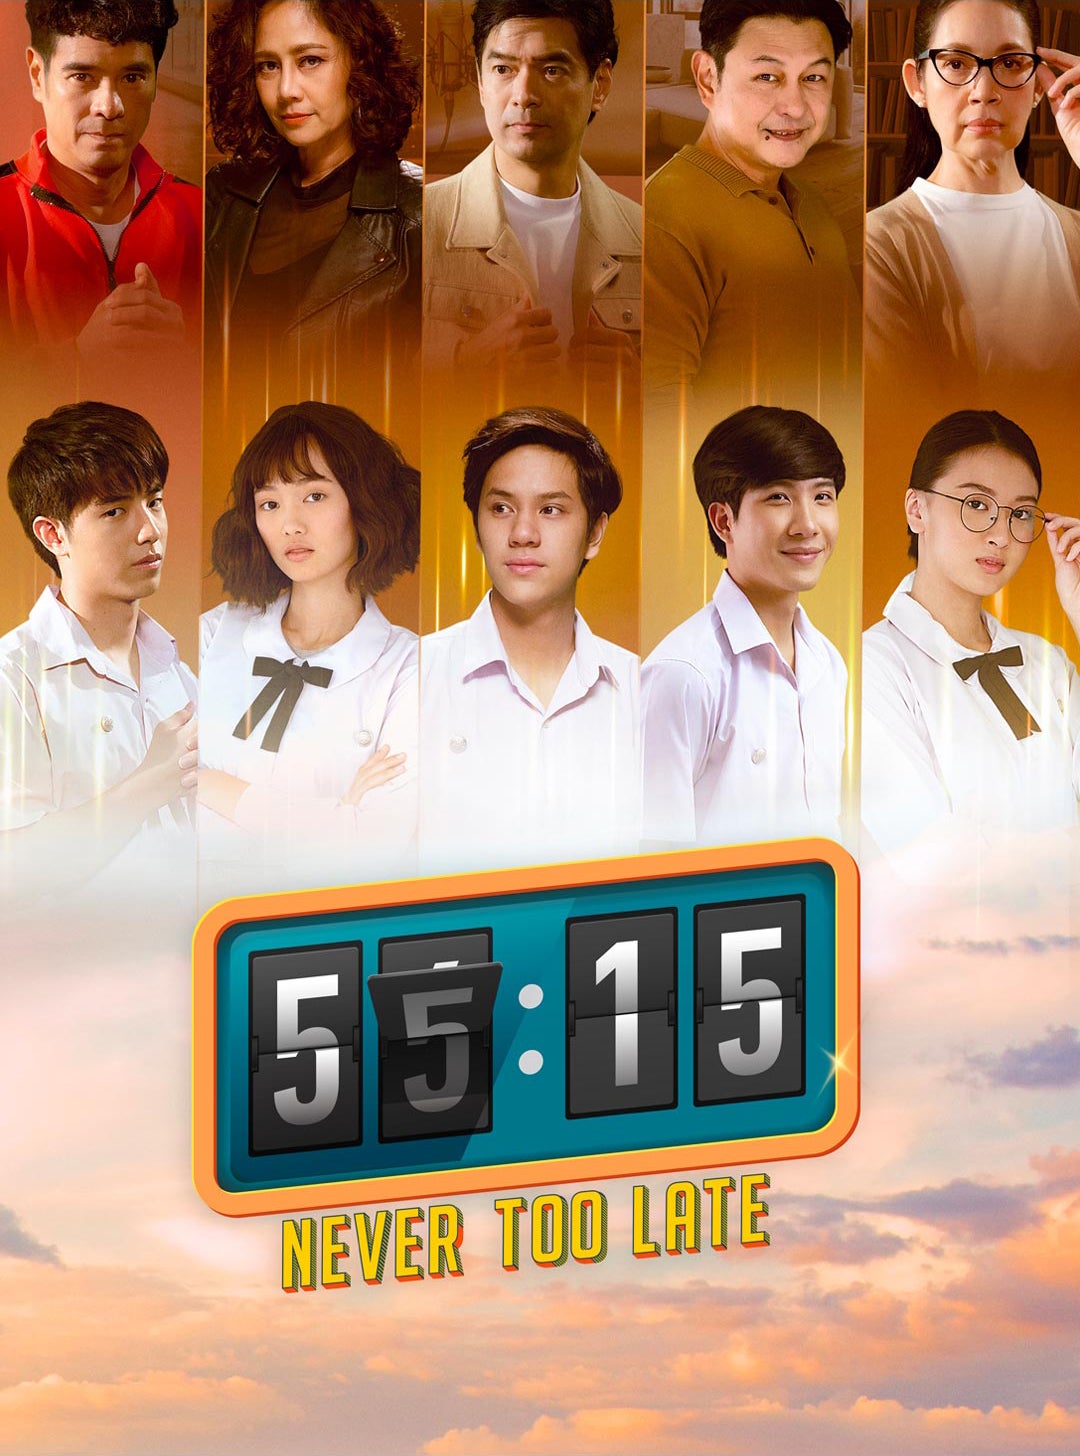 TV ratings for 55:15 Never Too Late in Philippines. Disney+ TV series